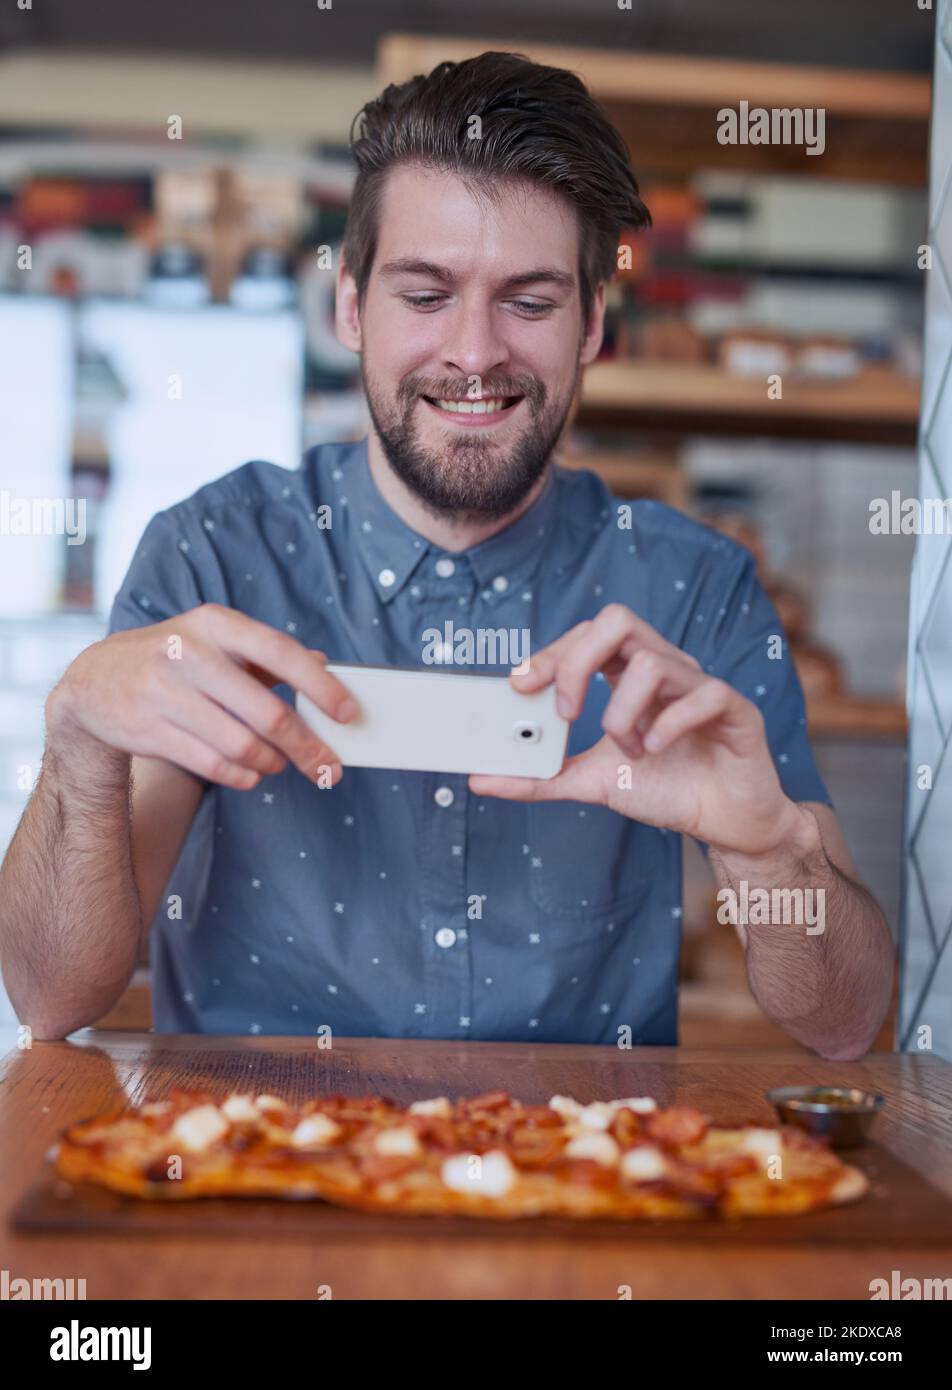 Straight to social media. a man taking a picture of his food at a restaurant. Stock Photo